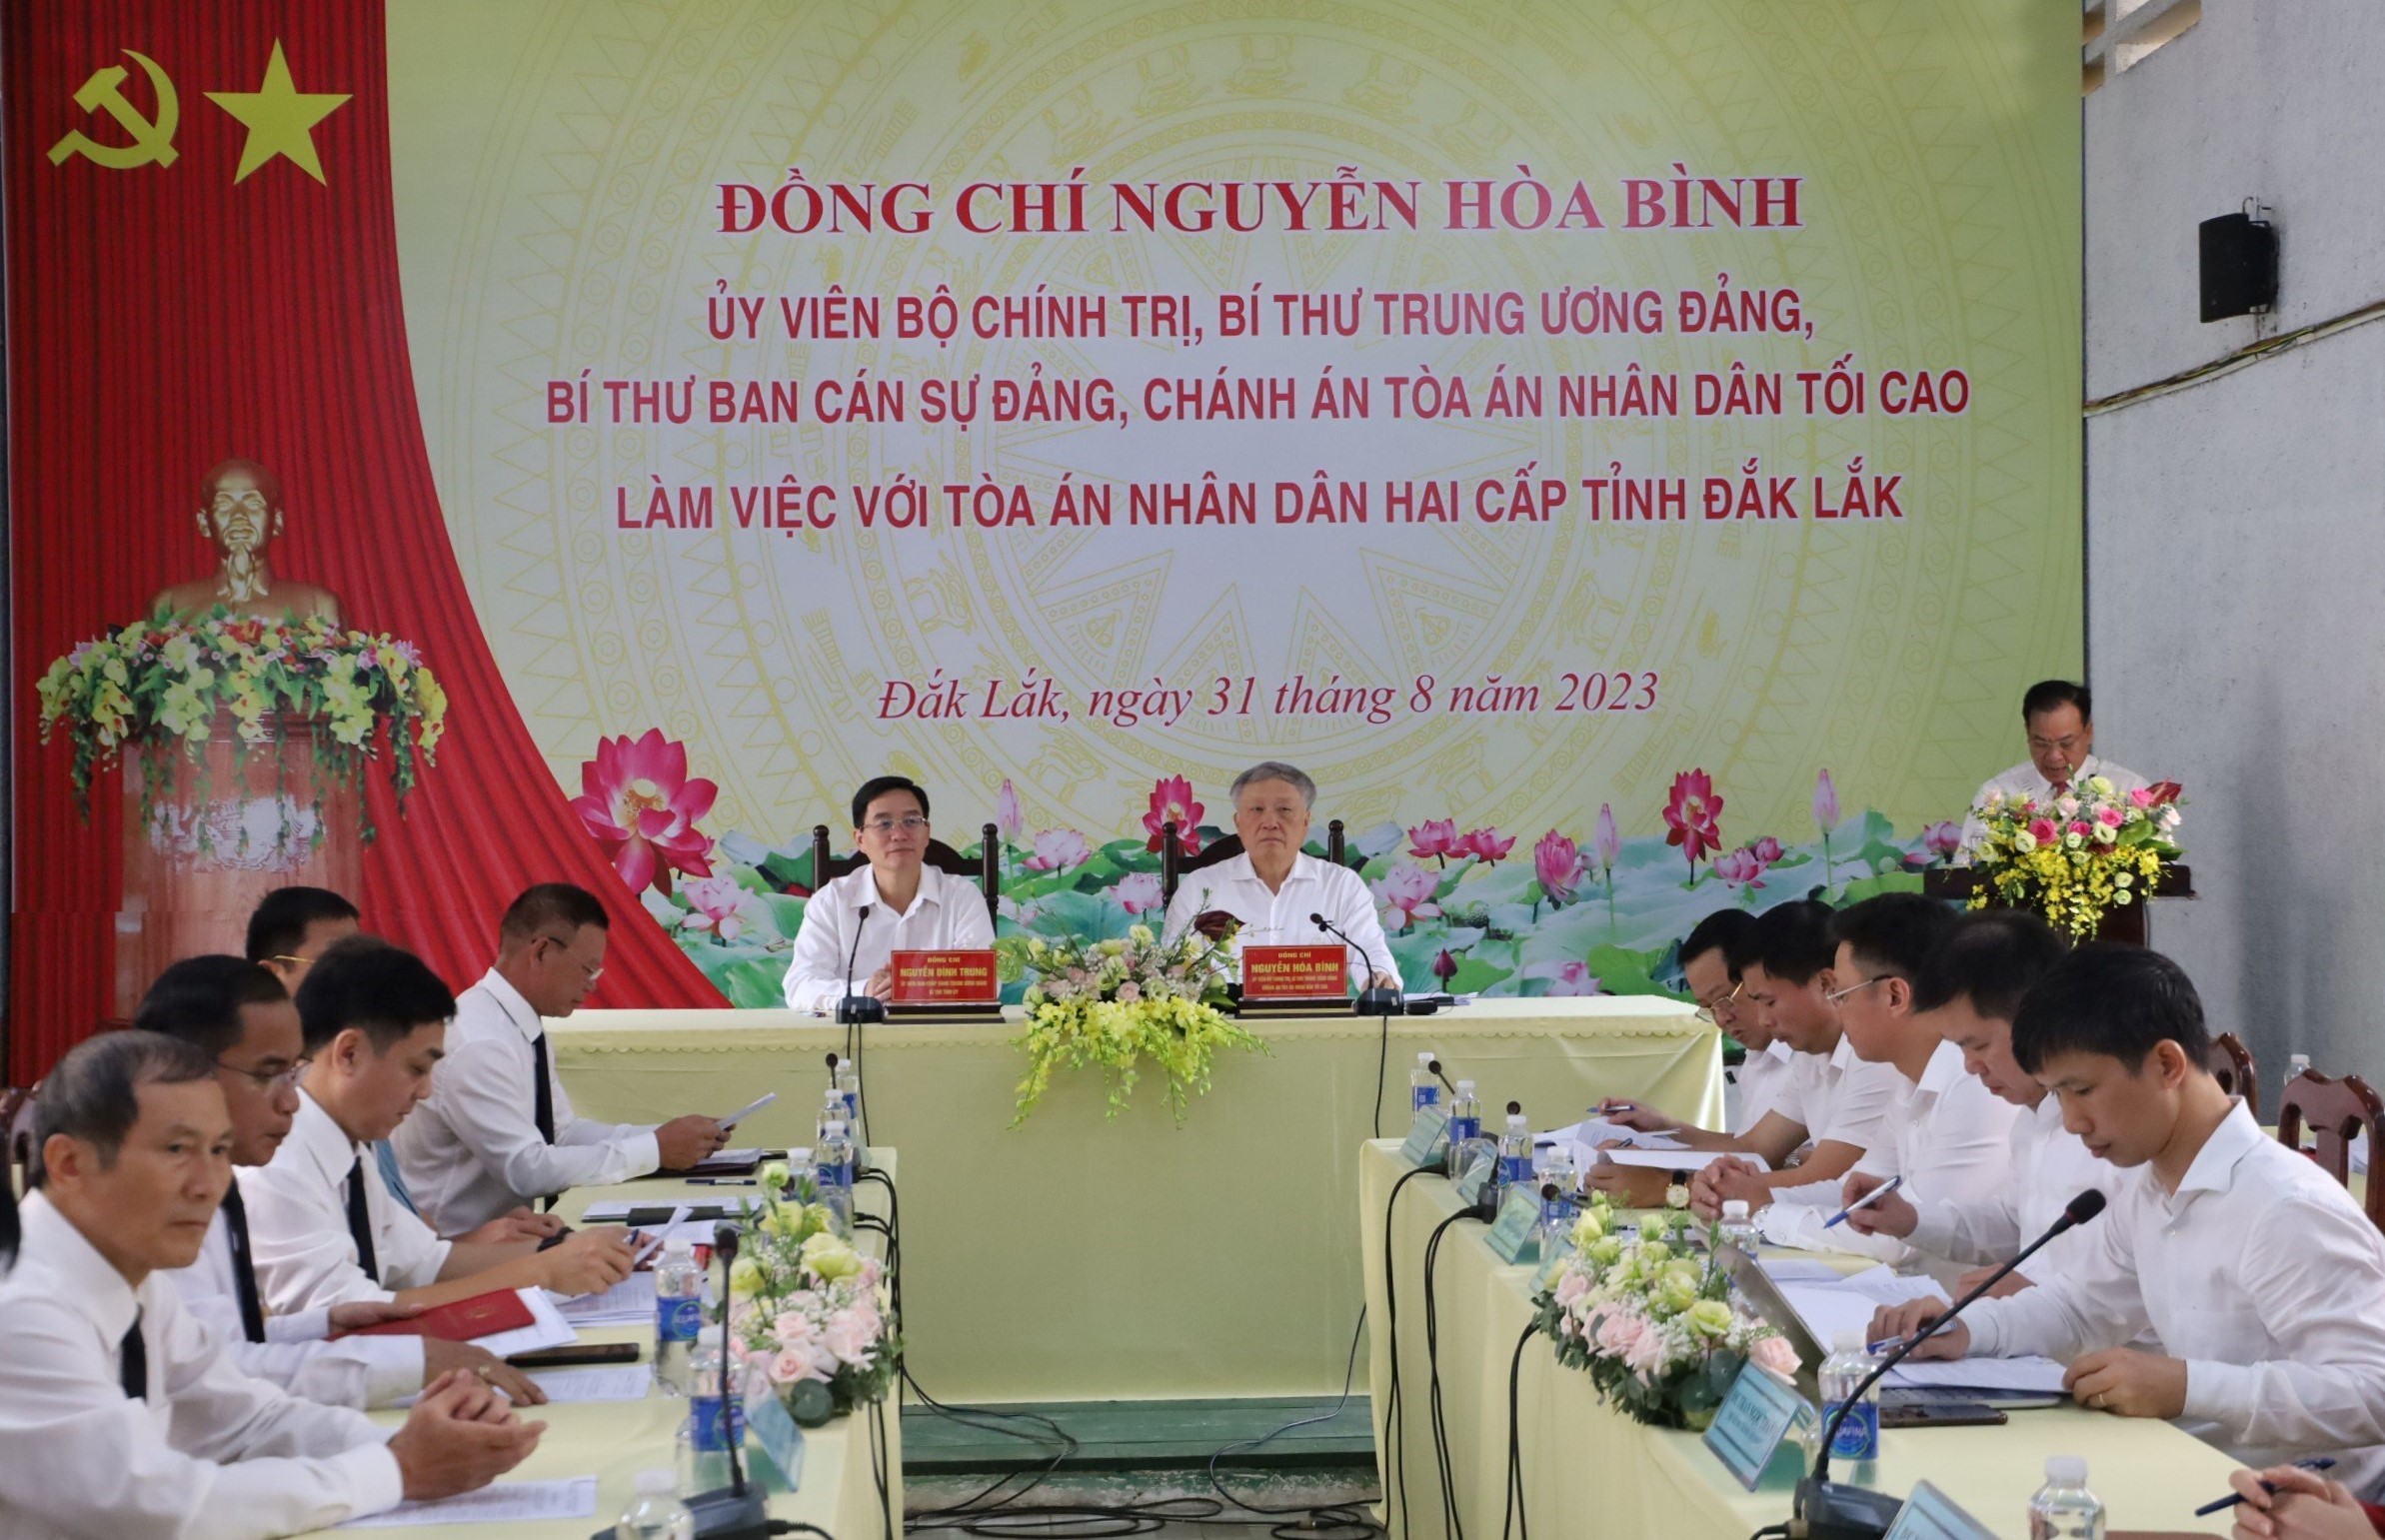 Chief Justice of the Supreme People's Court Nguyen Hoa Binh meets with the People's Courts of Dak Lak province